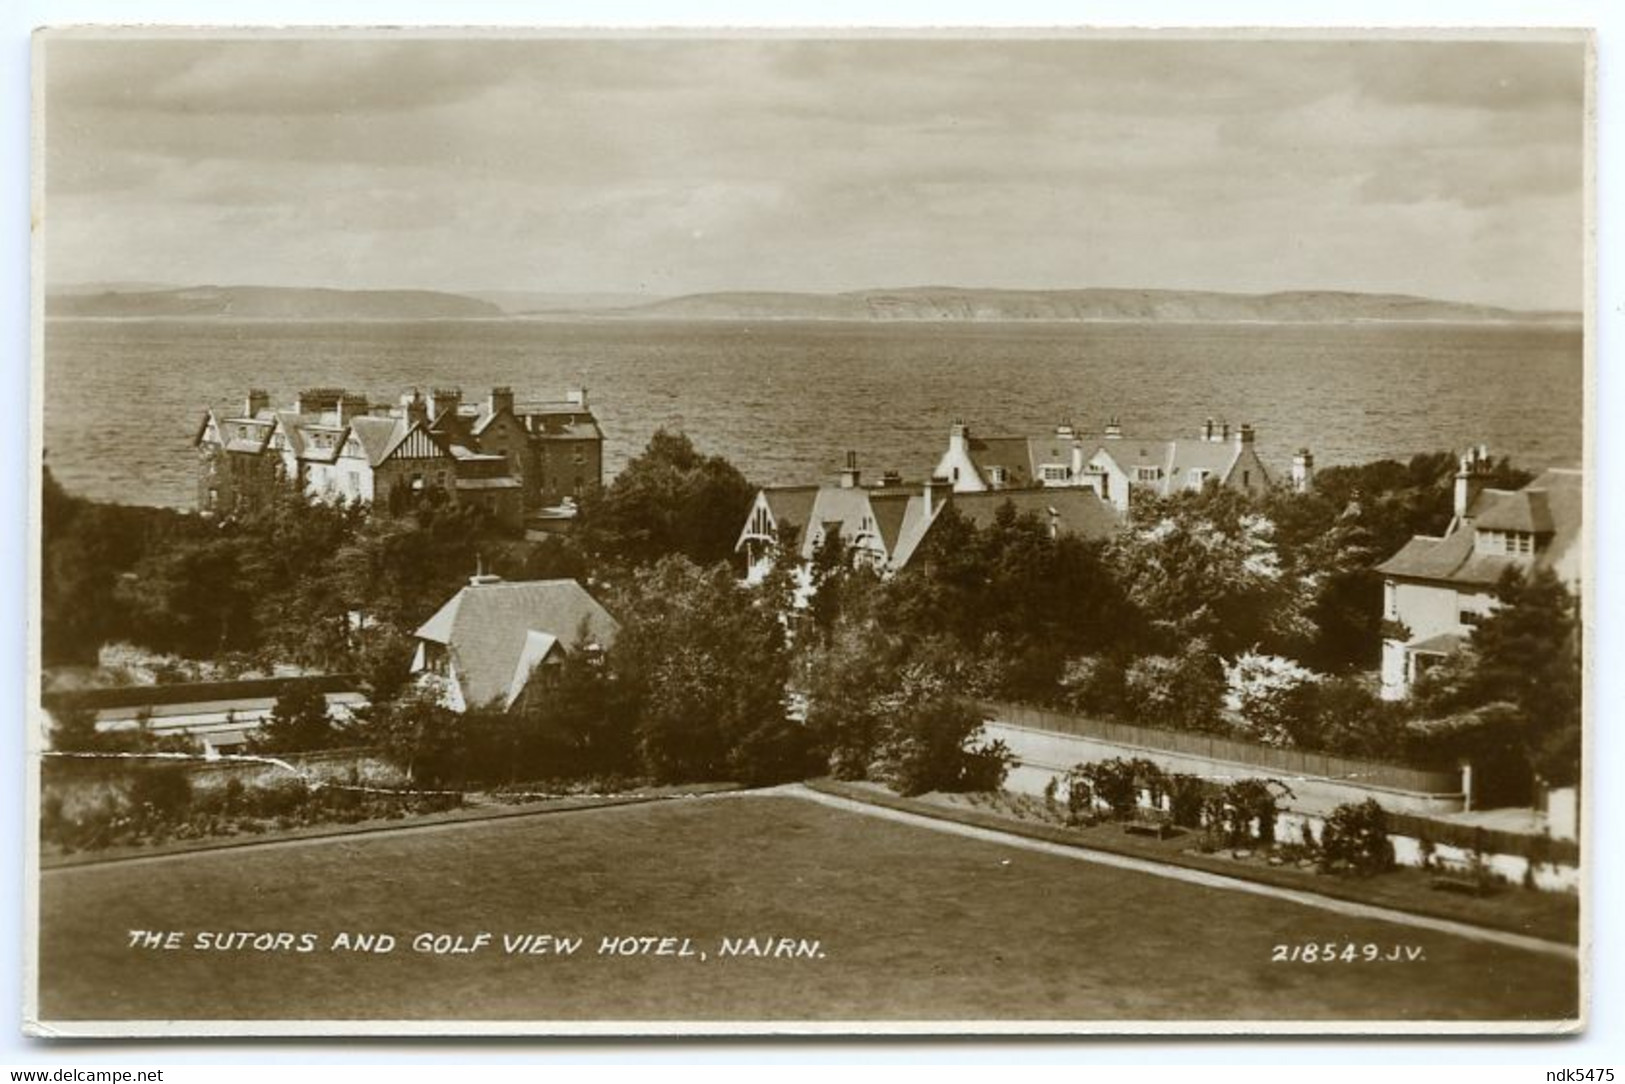 NAIRN : THE SUTORS AND GOLF VIEW HOTEL / ADDRESS - LEICESTER, SHANKLIN DRIVE (NISBET) - Nairnshire